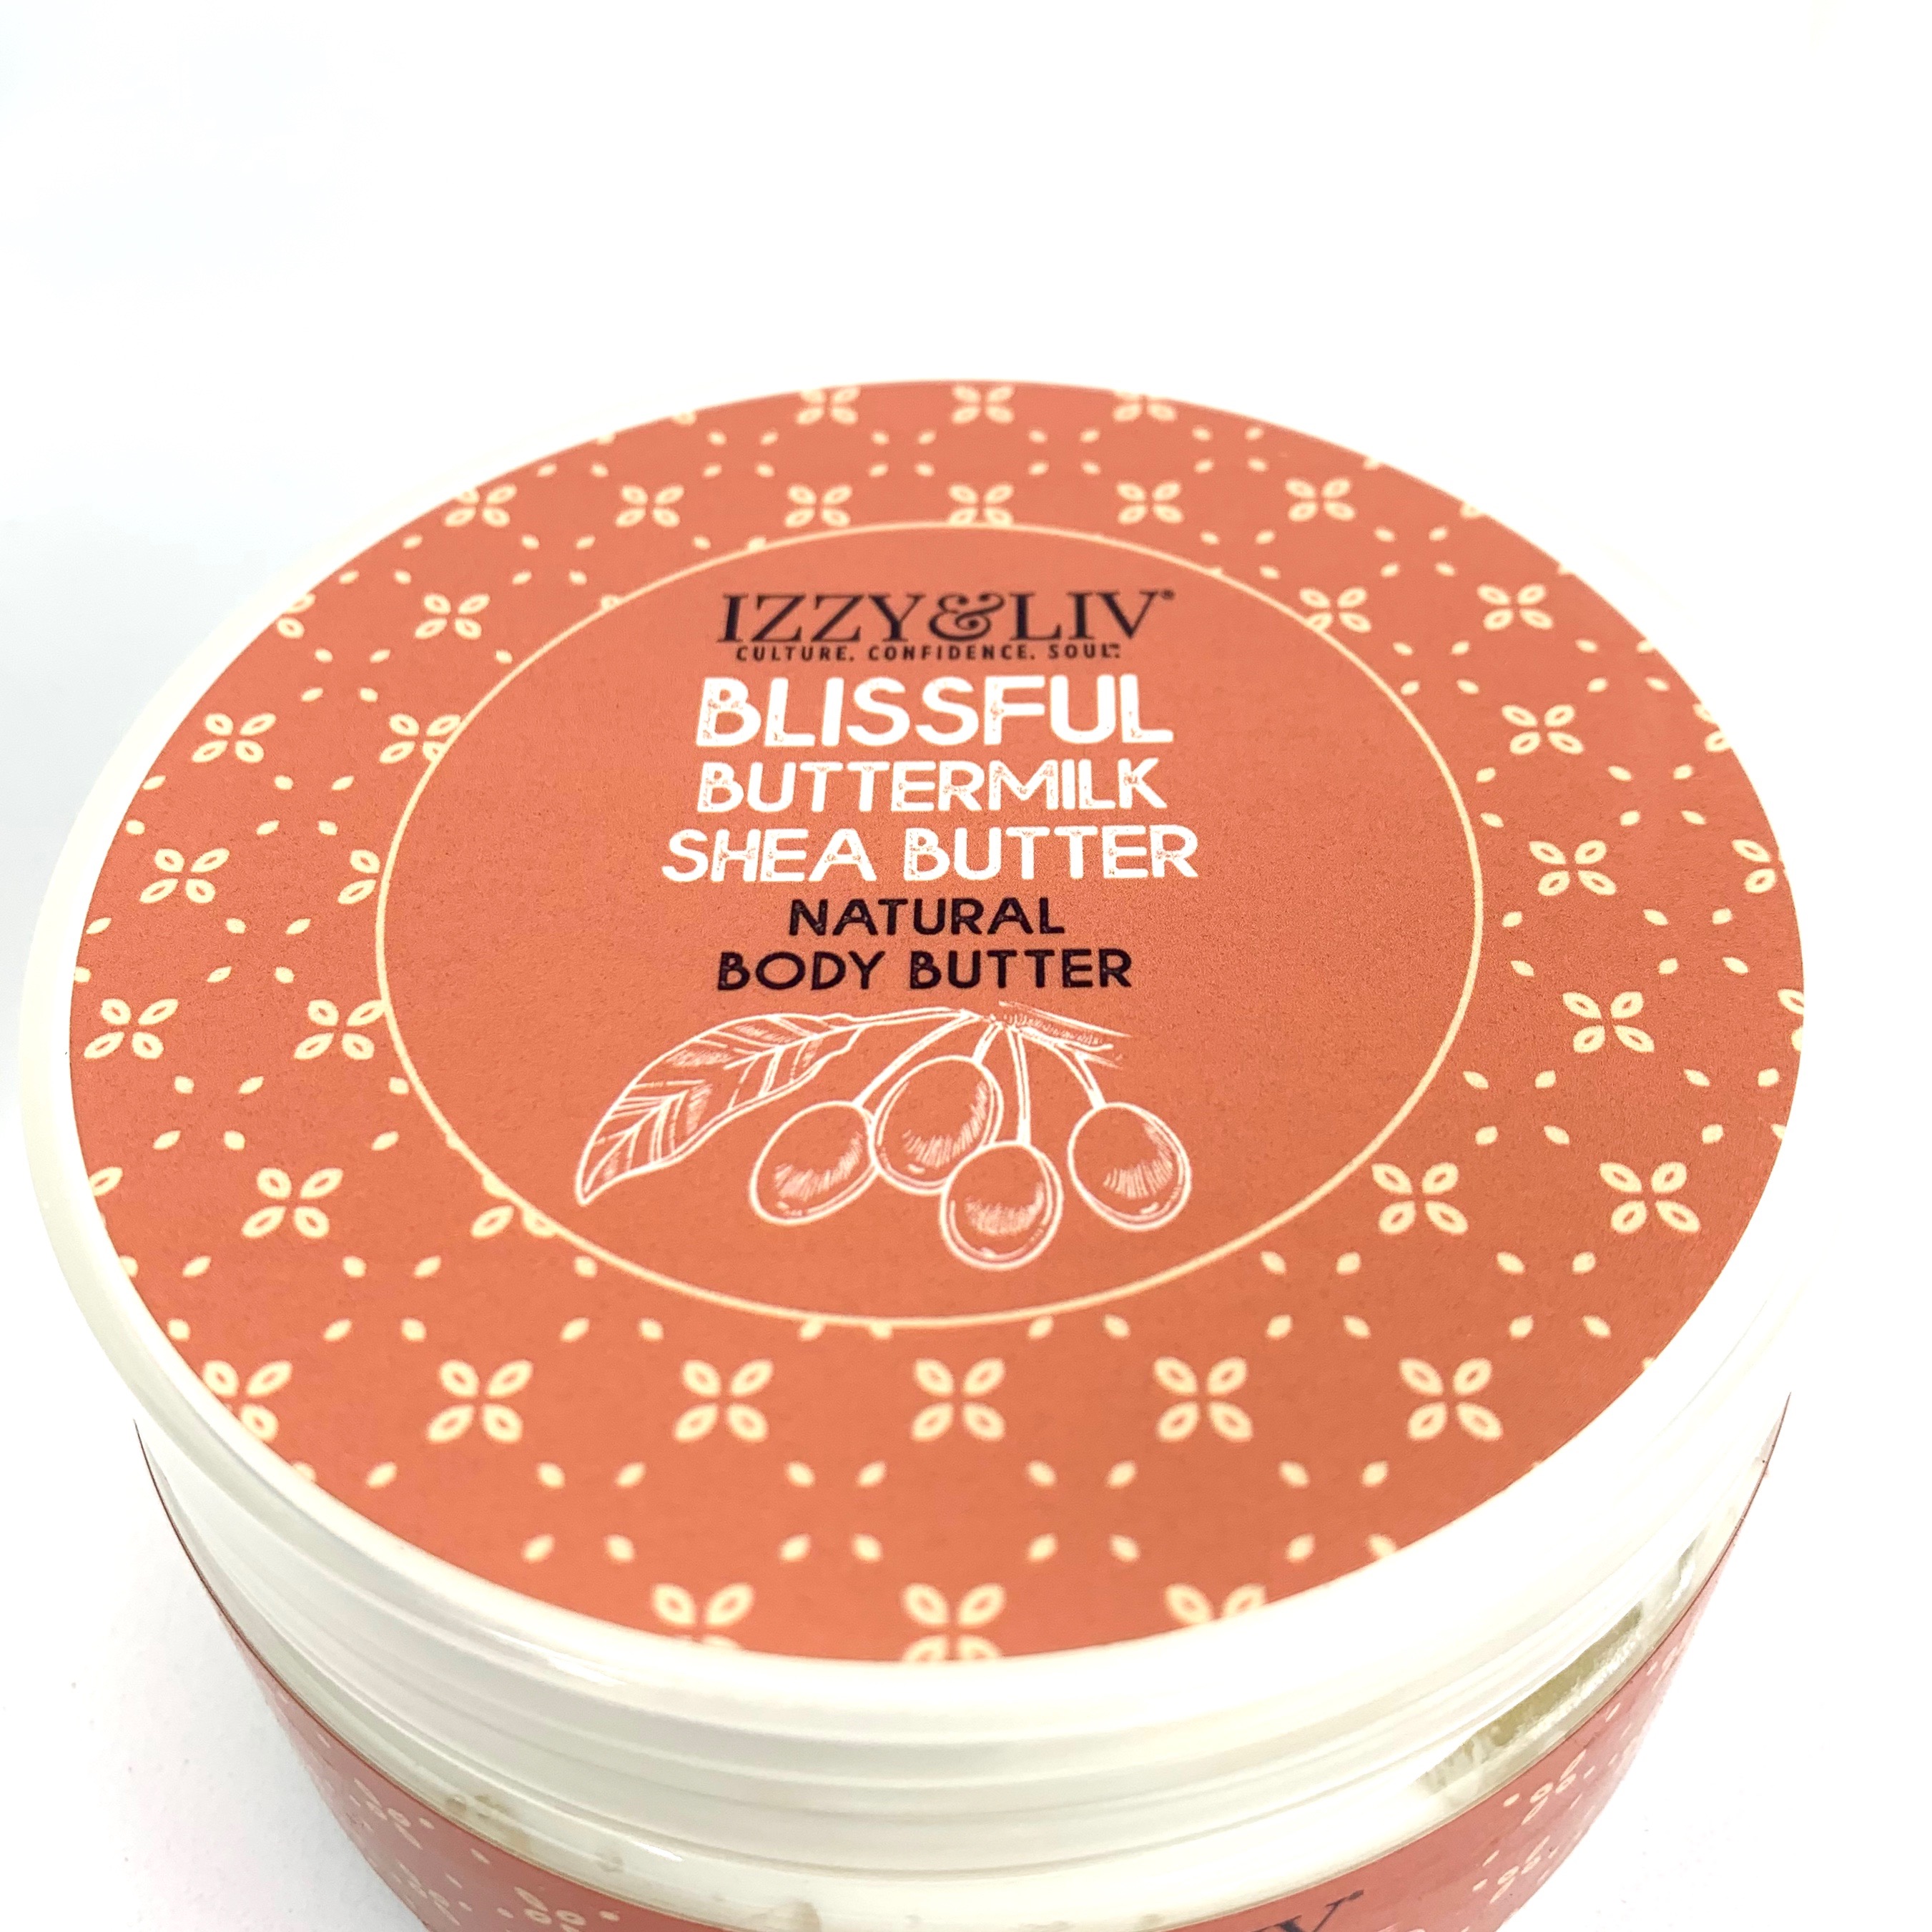 Body Butter Top for Brown Sugar Box May 2020